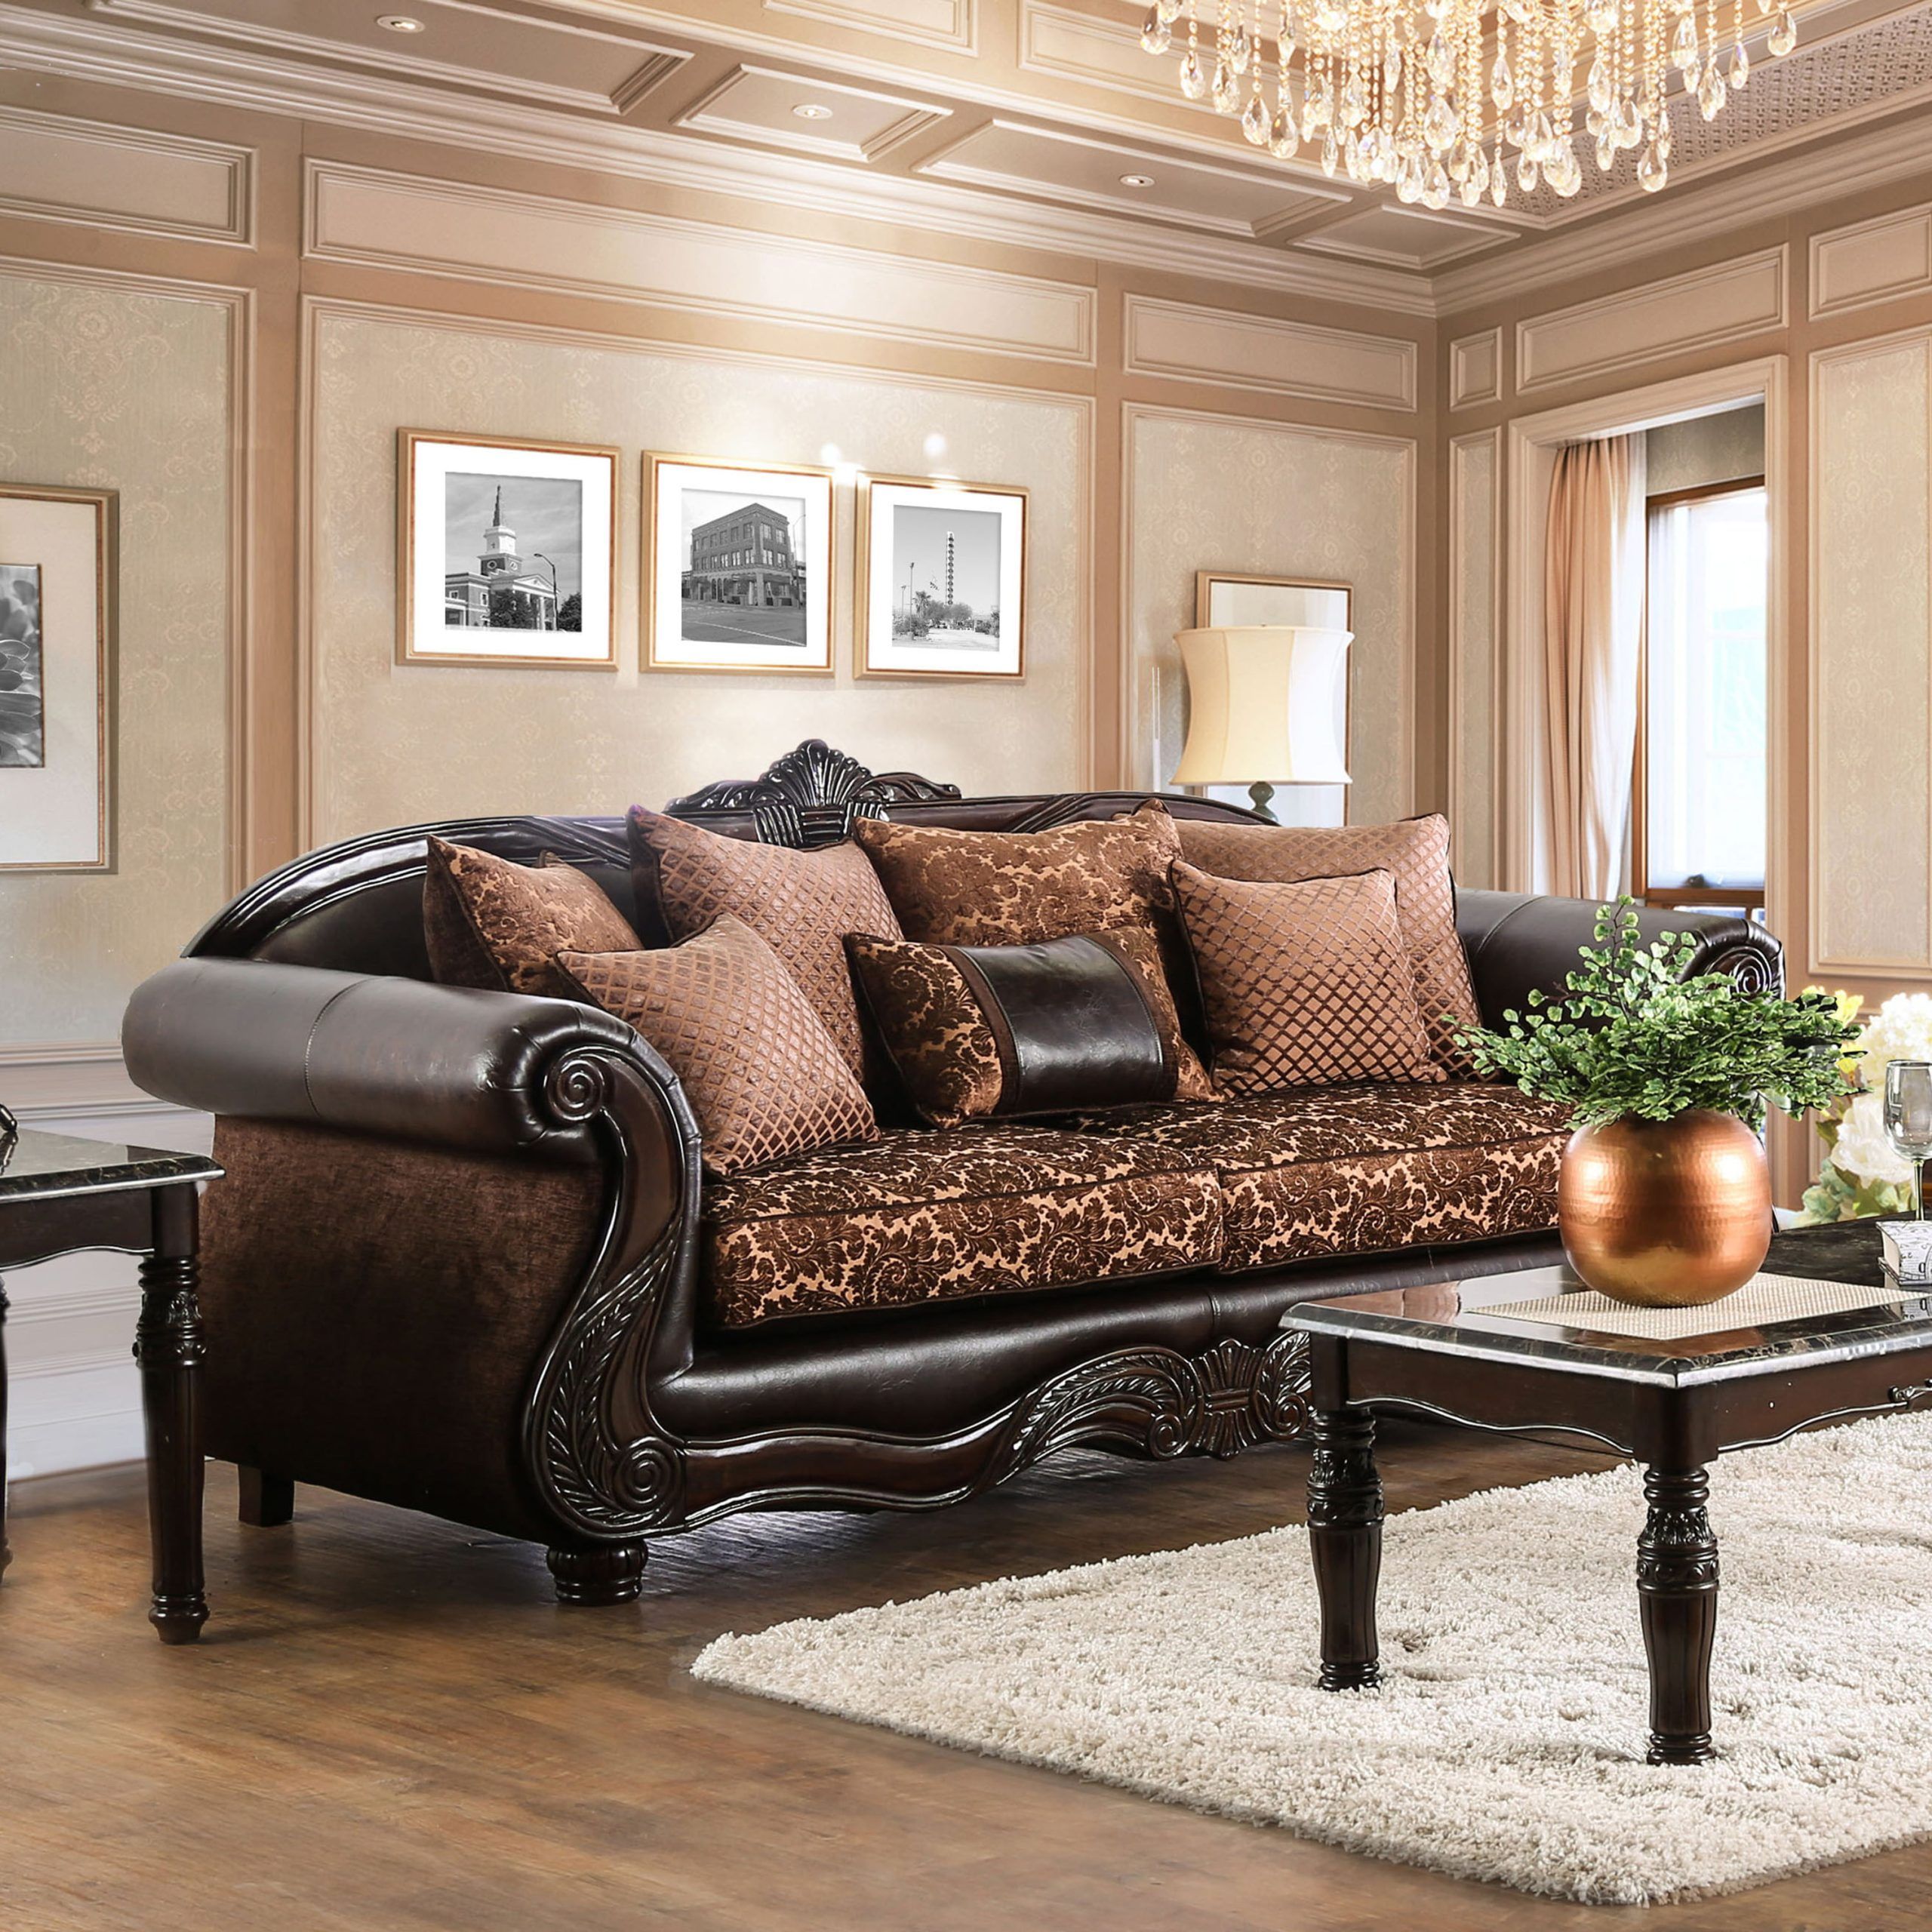 Furniture Of America Traditional Faux Leather Hannon Sofa, Brown Throughout Faux Leather Sofas In Chocolate Brown (Gallery 7 of 20)